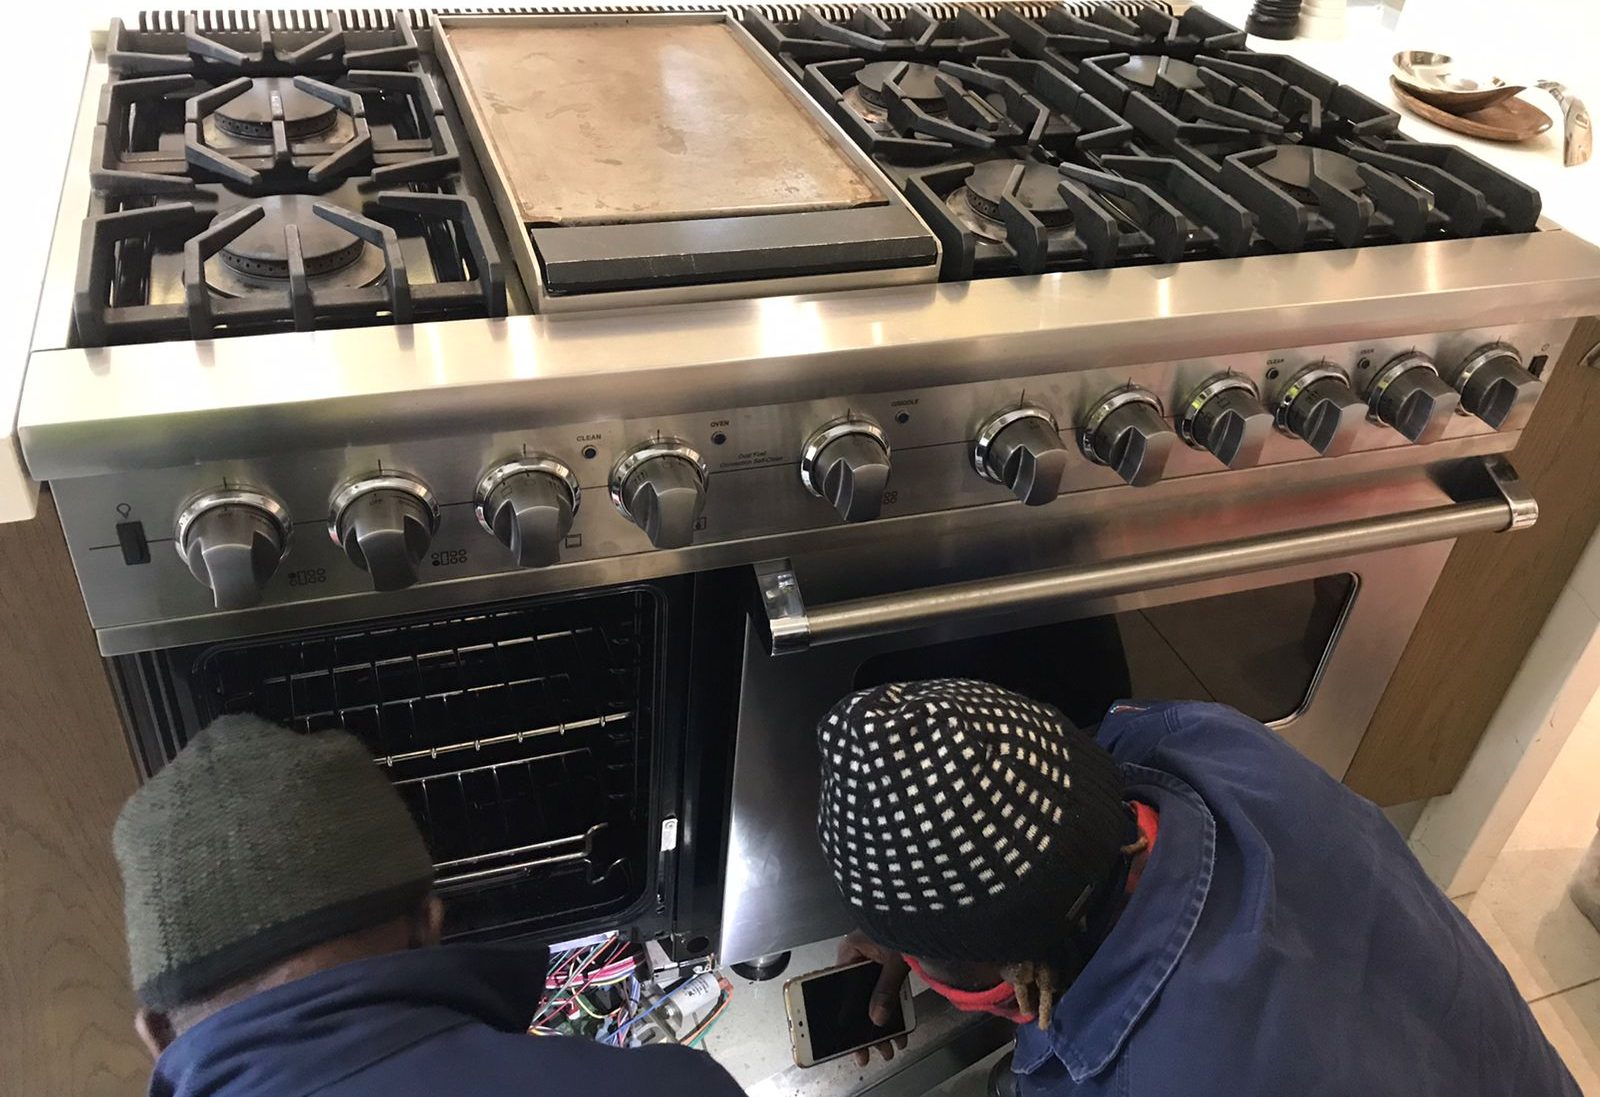 Why Is My Oven Not Heating Up? Exploring Oven Breakdown Insurance and Oven Repair Services